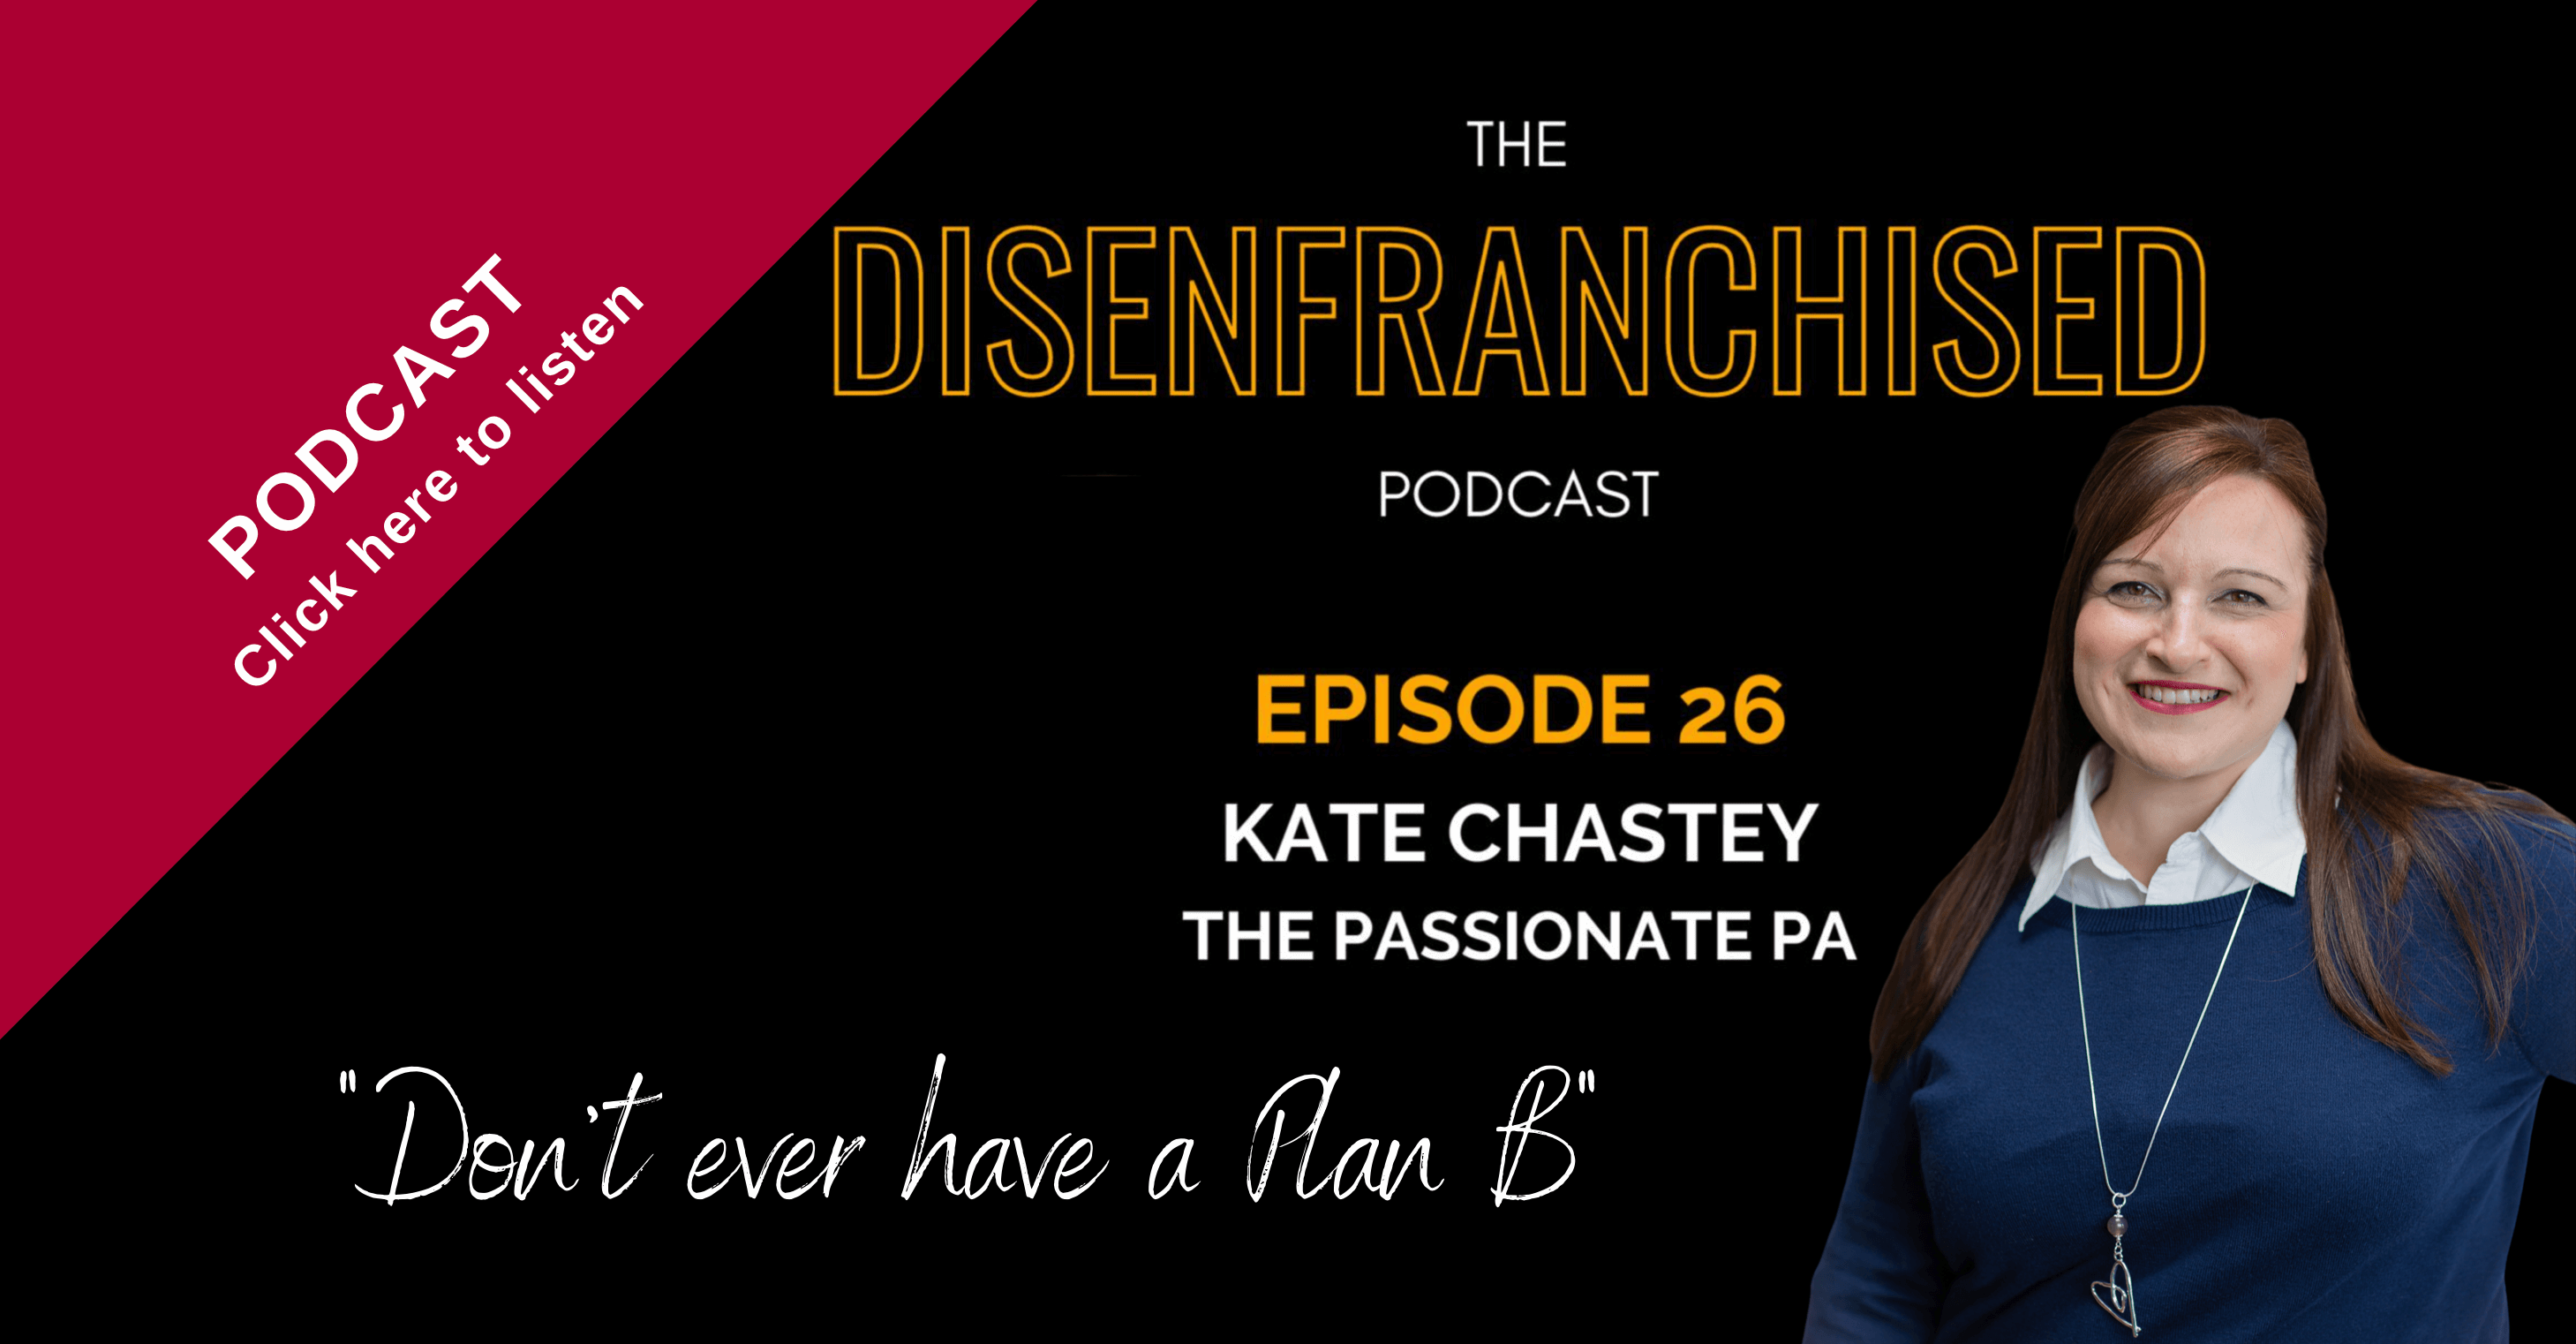 The Disenfranchised Podcast – Don’t ever have a Plan B